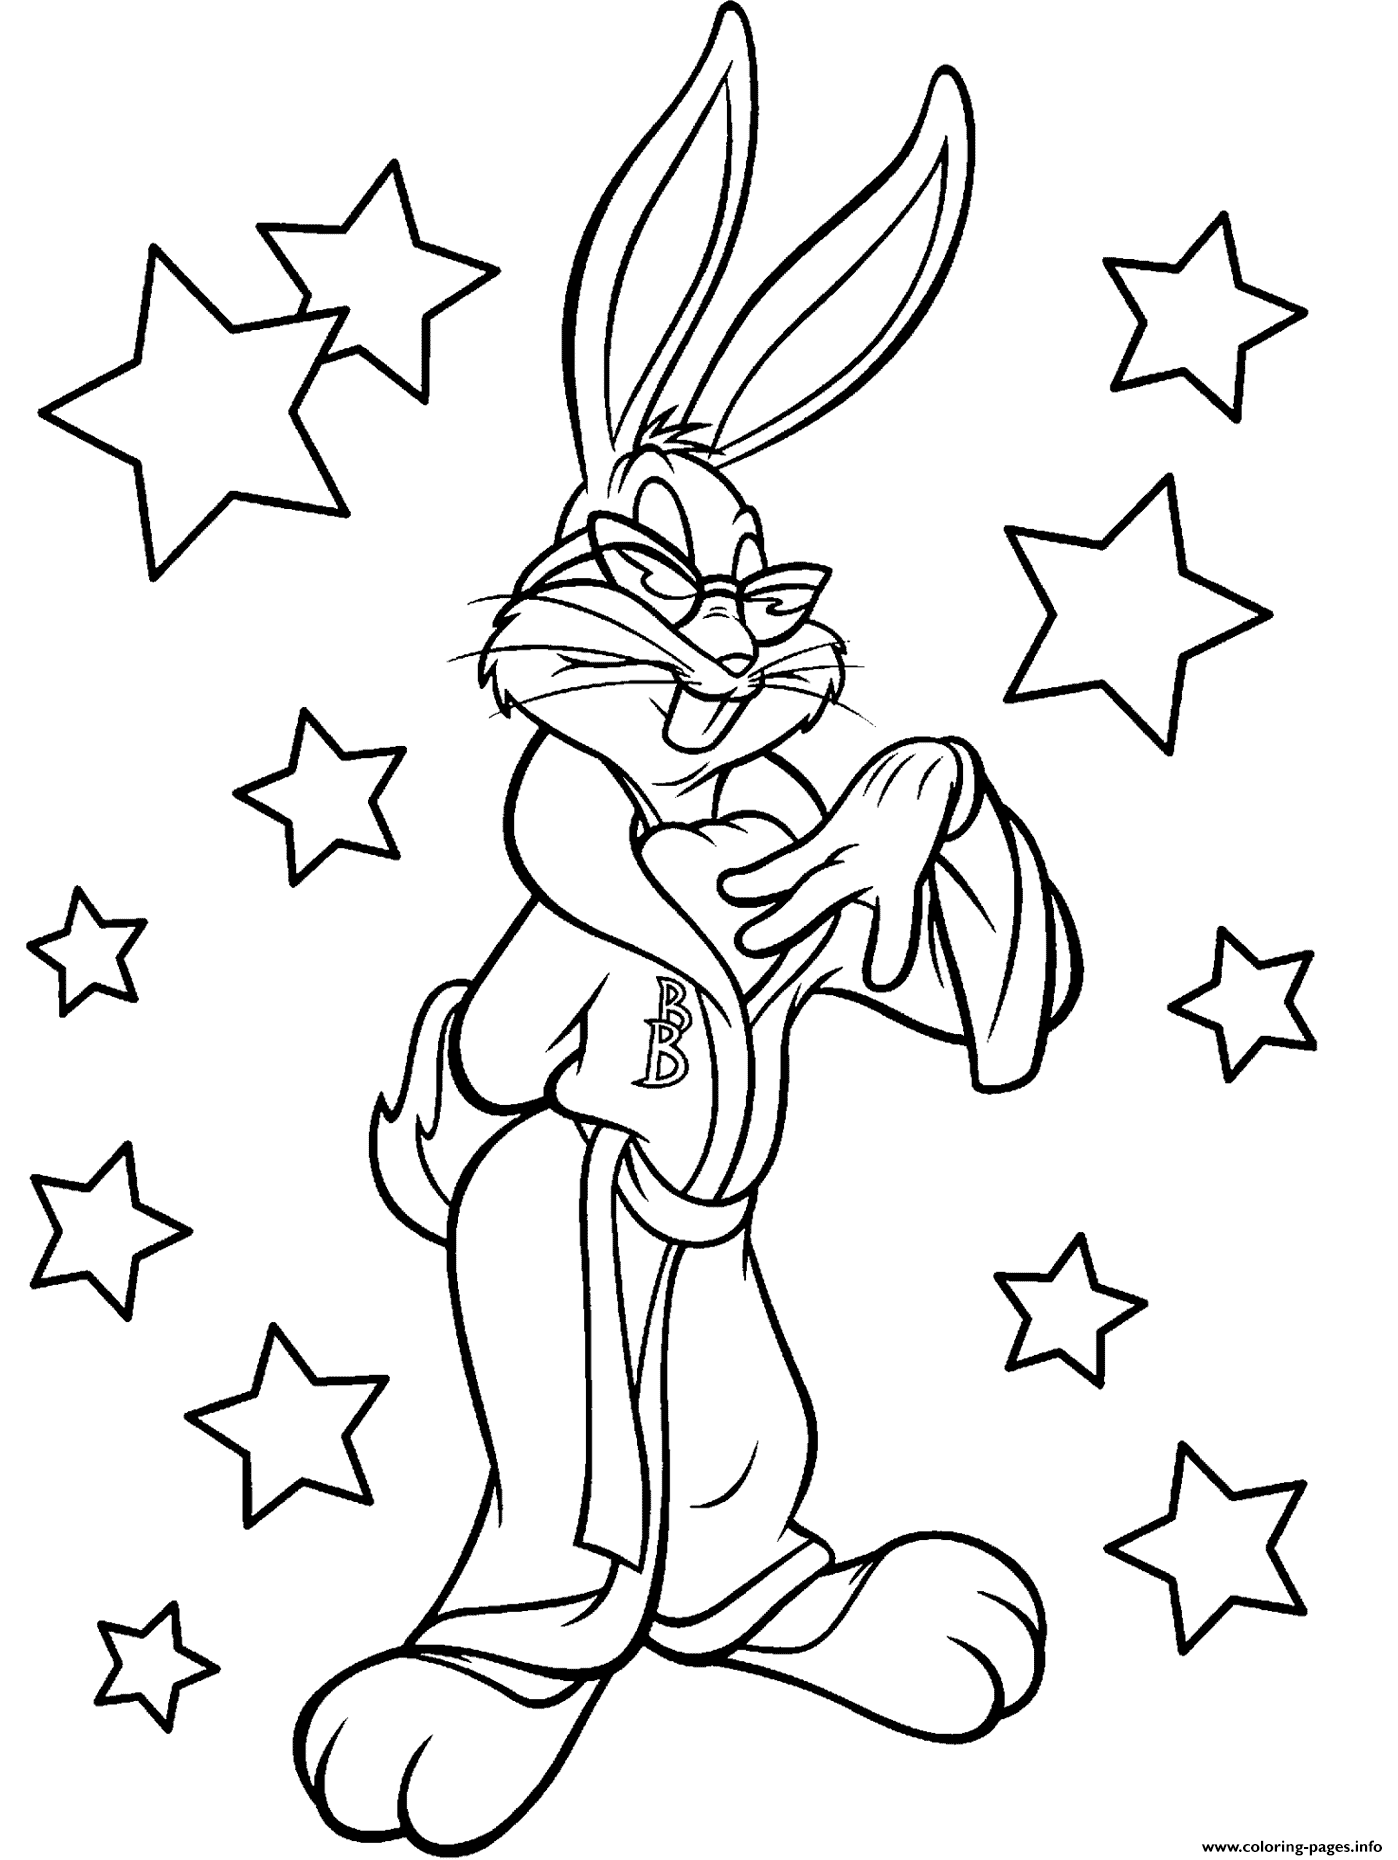 Bug Bunny Looney Toons S Printa6c8 Coloring Pages Printable